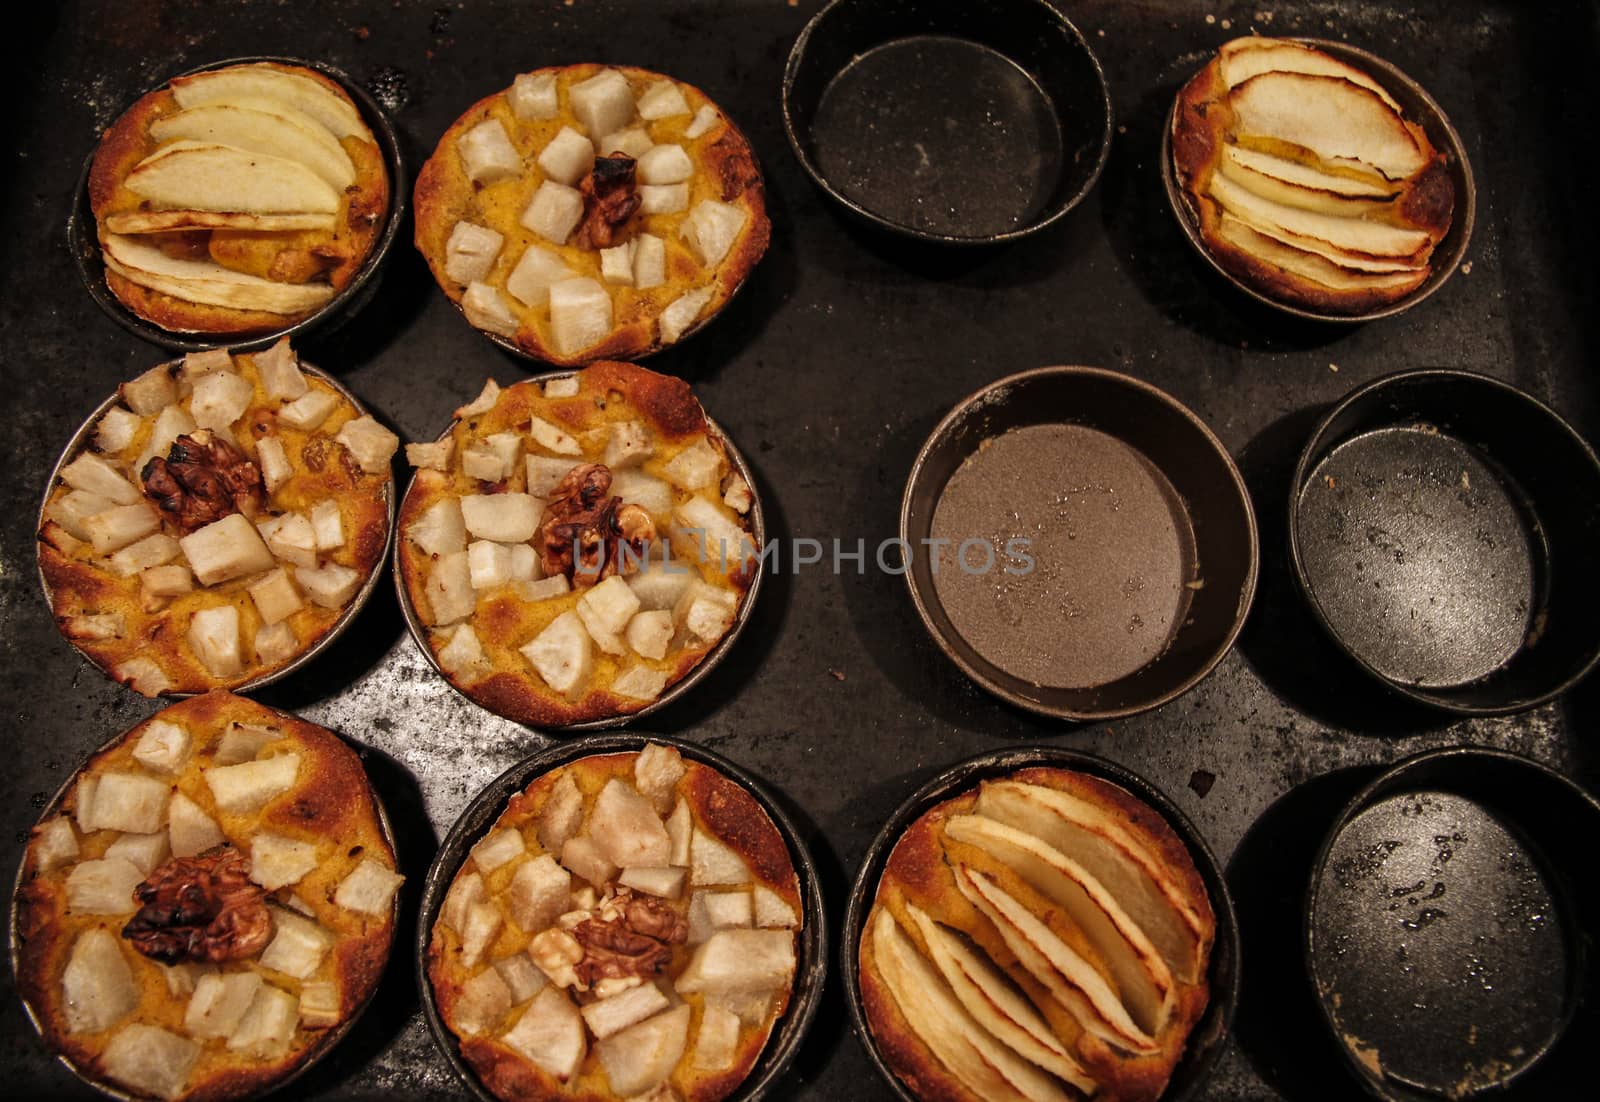 Small homemade apple pies freshly baked each in its mold by robbyfontanesi